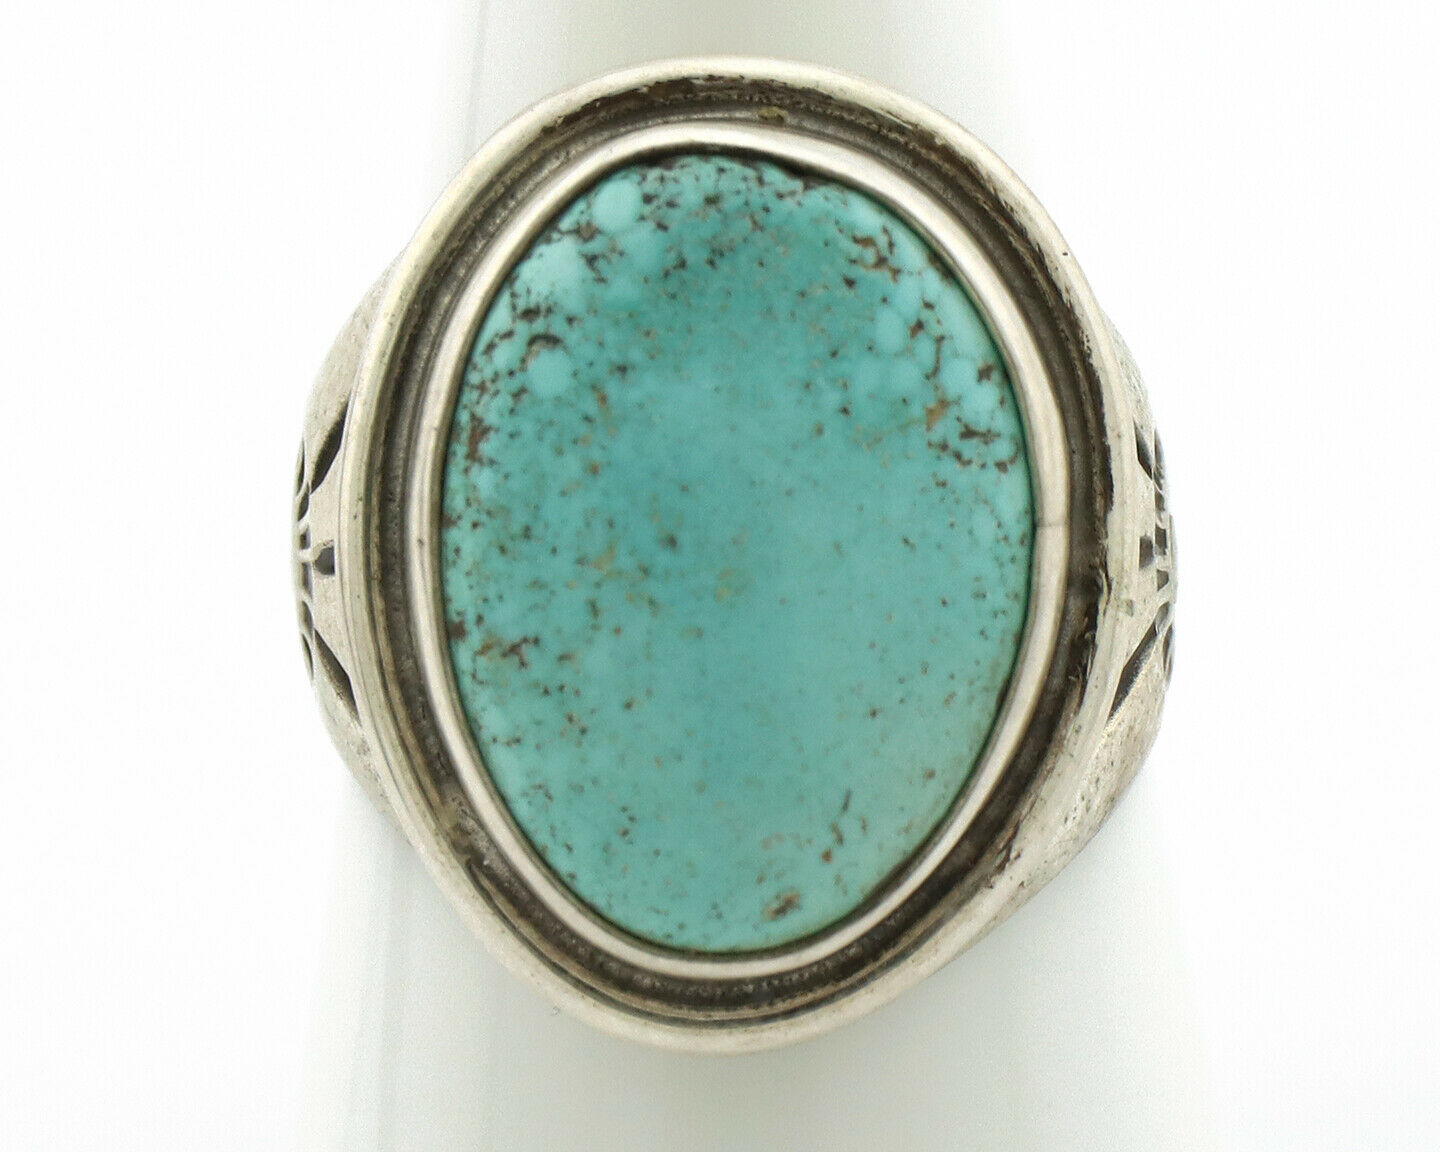 Navajo Ring .925 Silver Natural Blue Turquoise Native American Artist C.80's